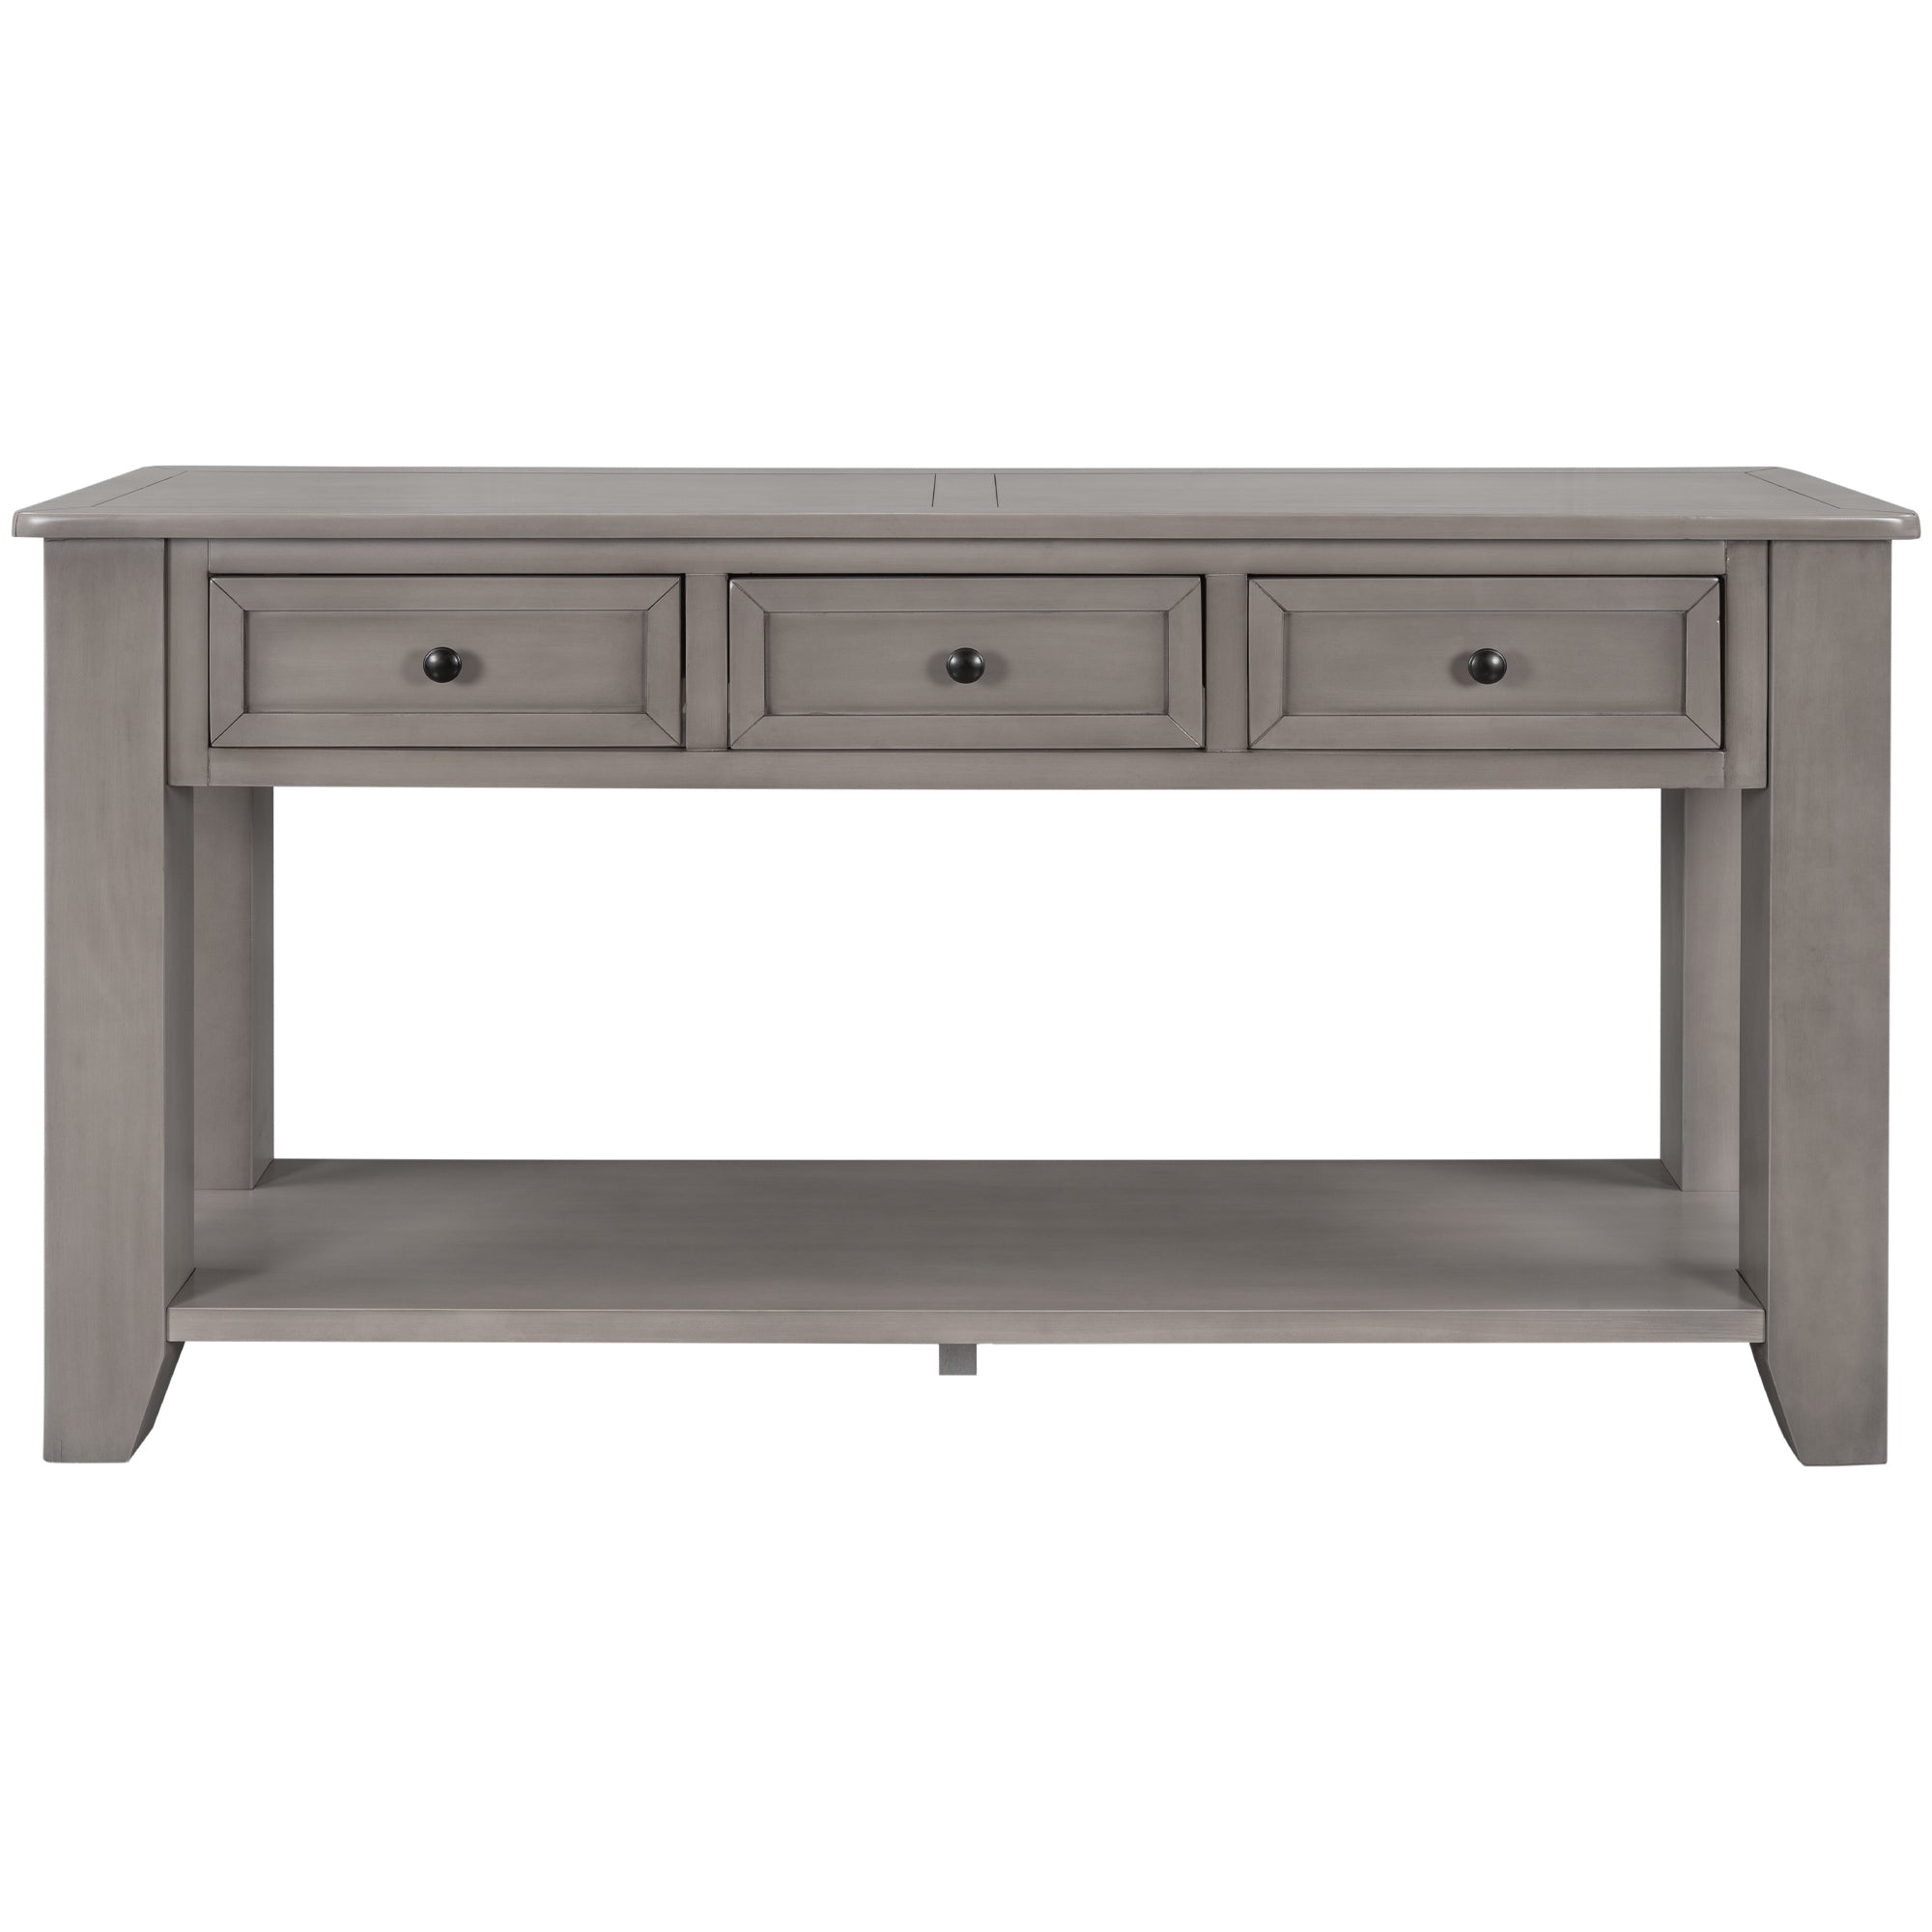 55'' Modern Console Table Sofa Table for Living Room with 3 Drawers and 1 Shelf (Gray)